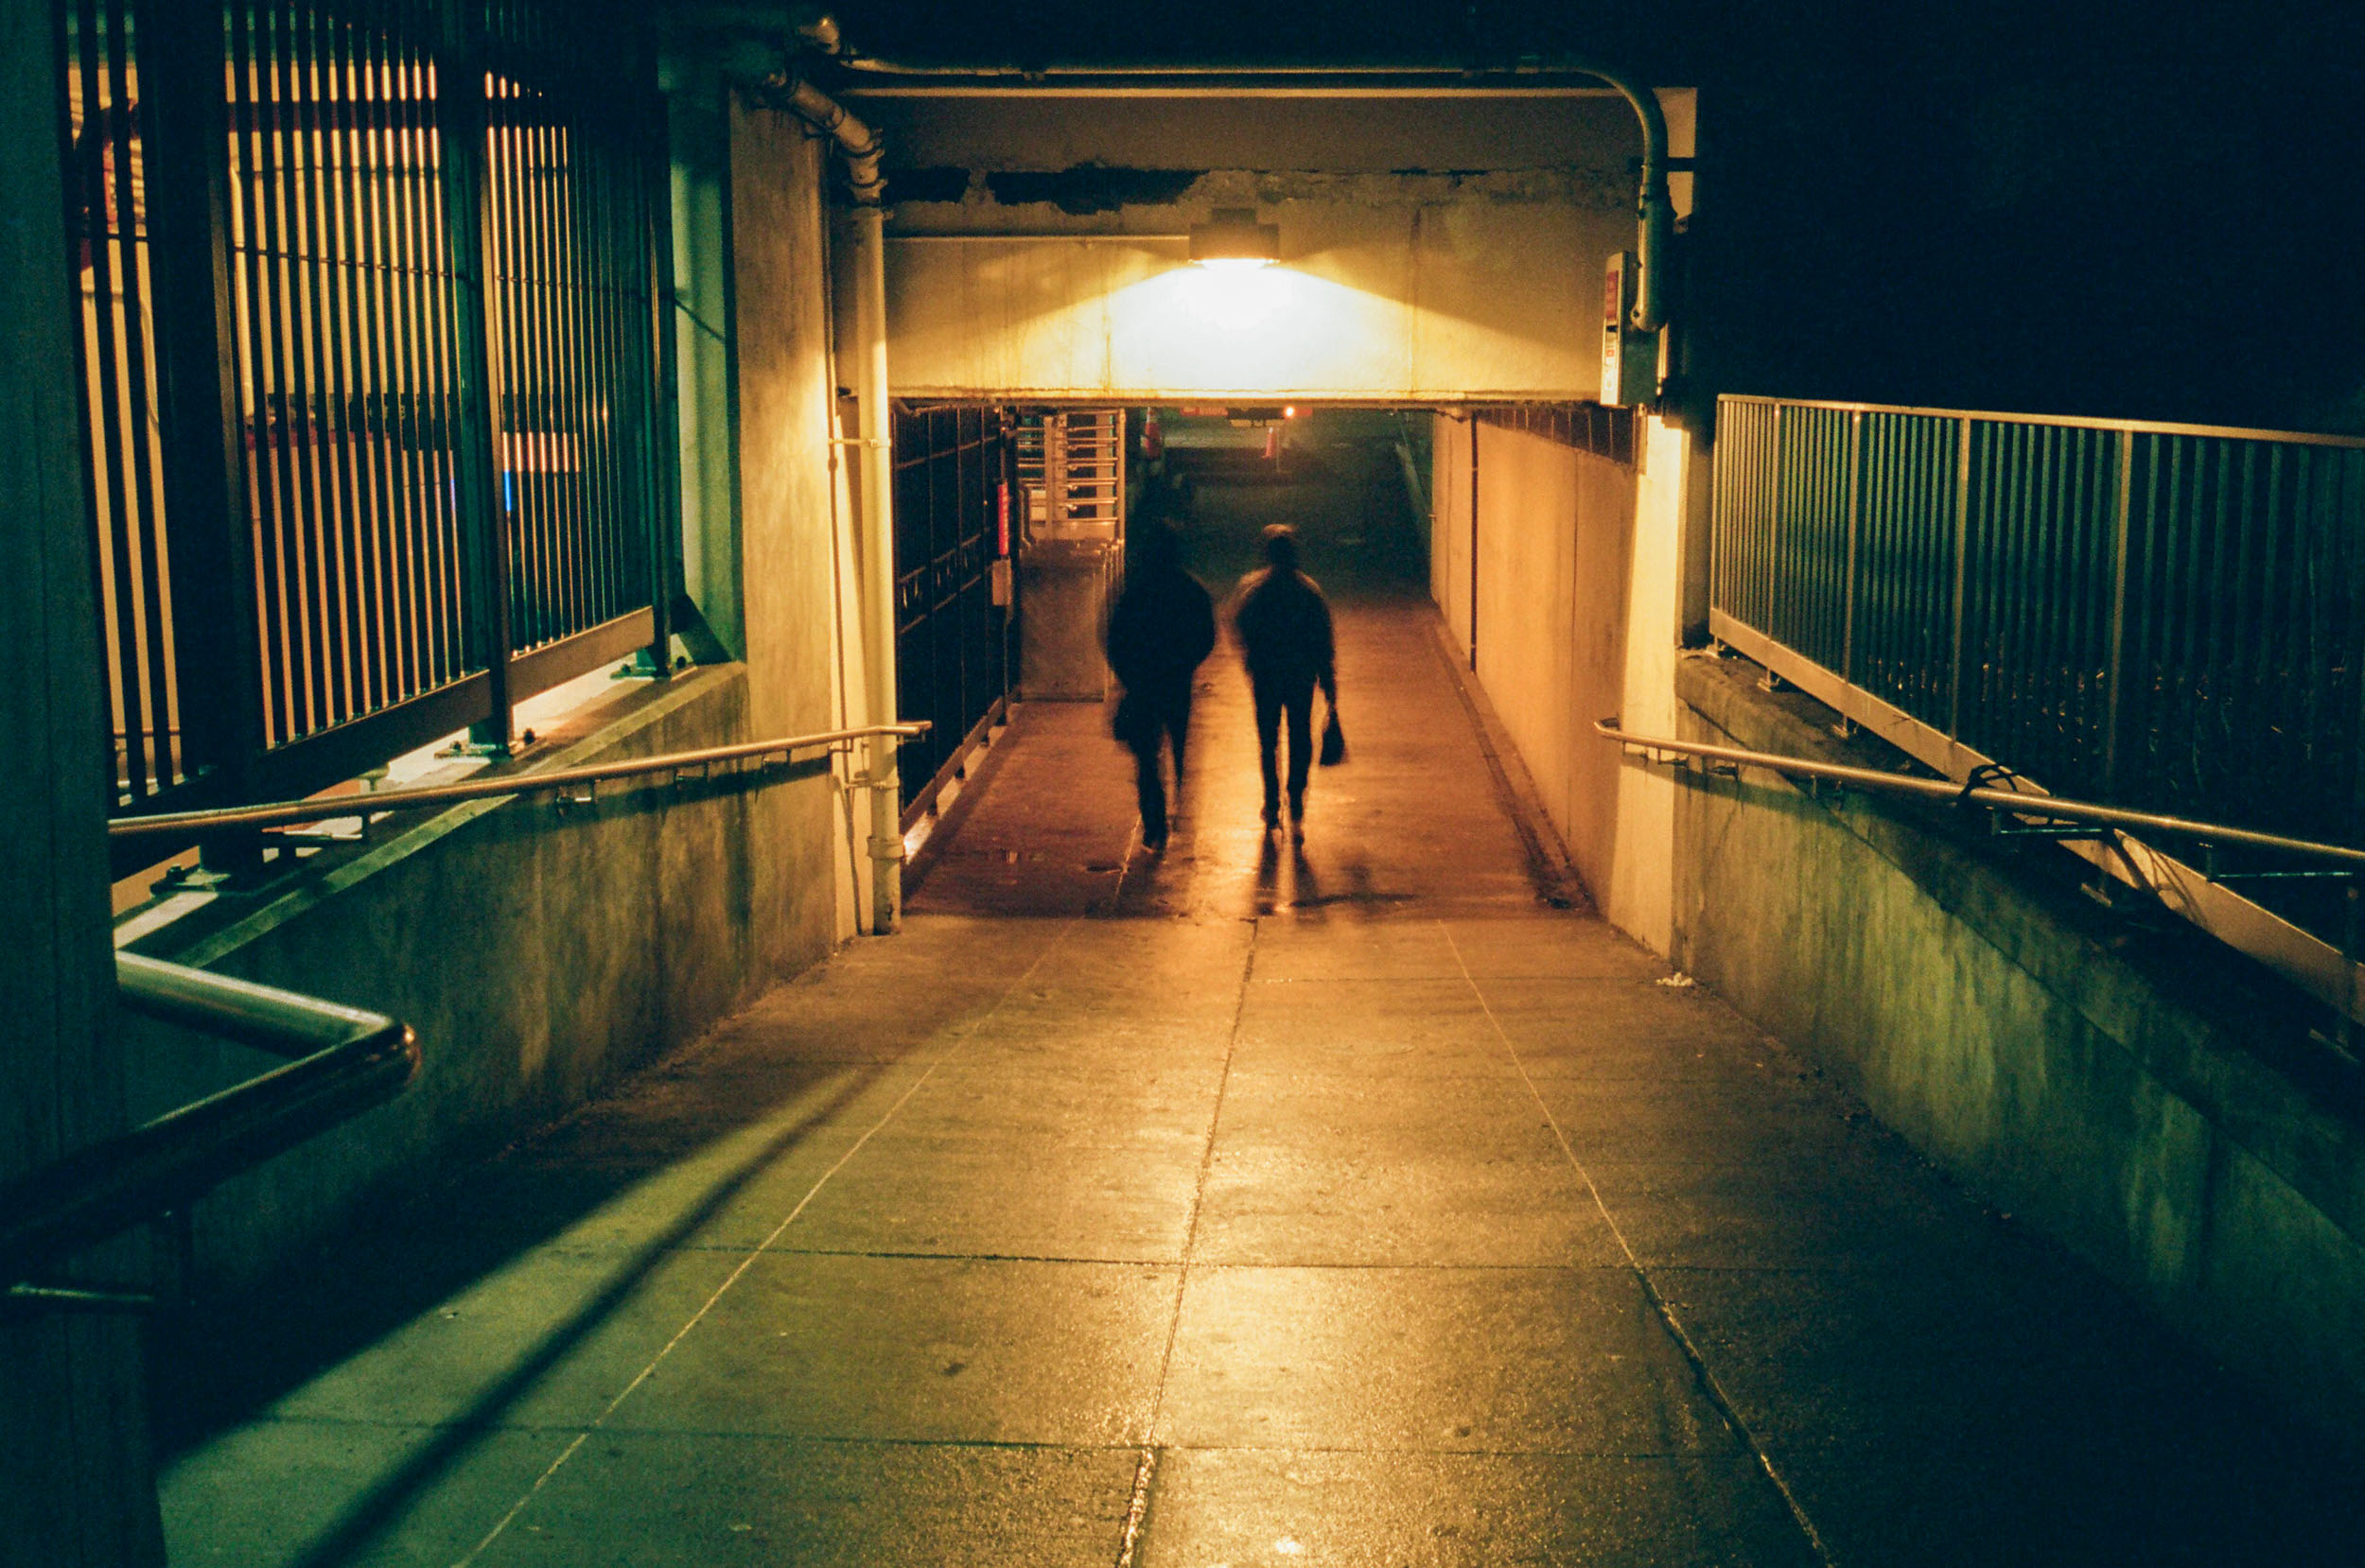 A NIGHT SHOT OF THE SUBWAY STATION AVENUE H IN SOUTH BROOKLYN 